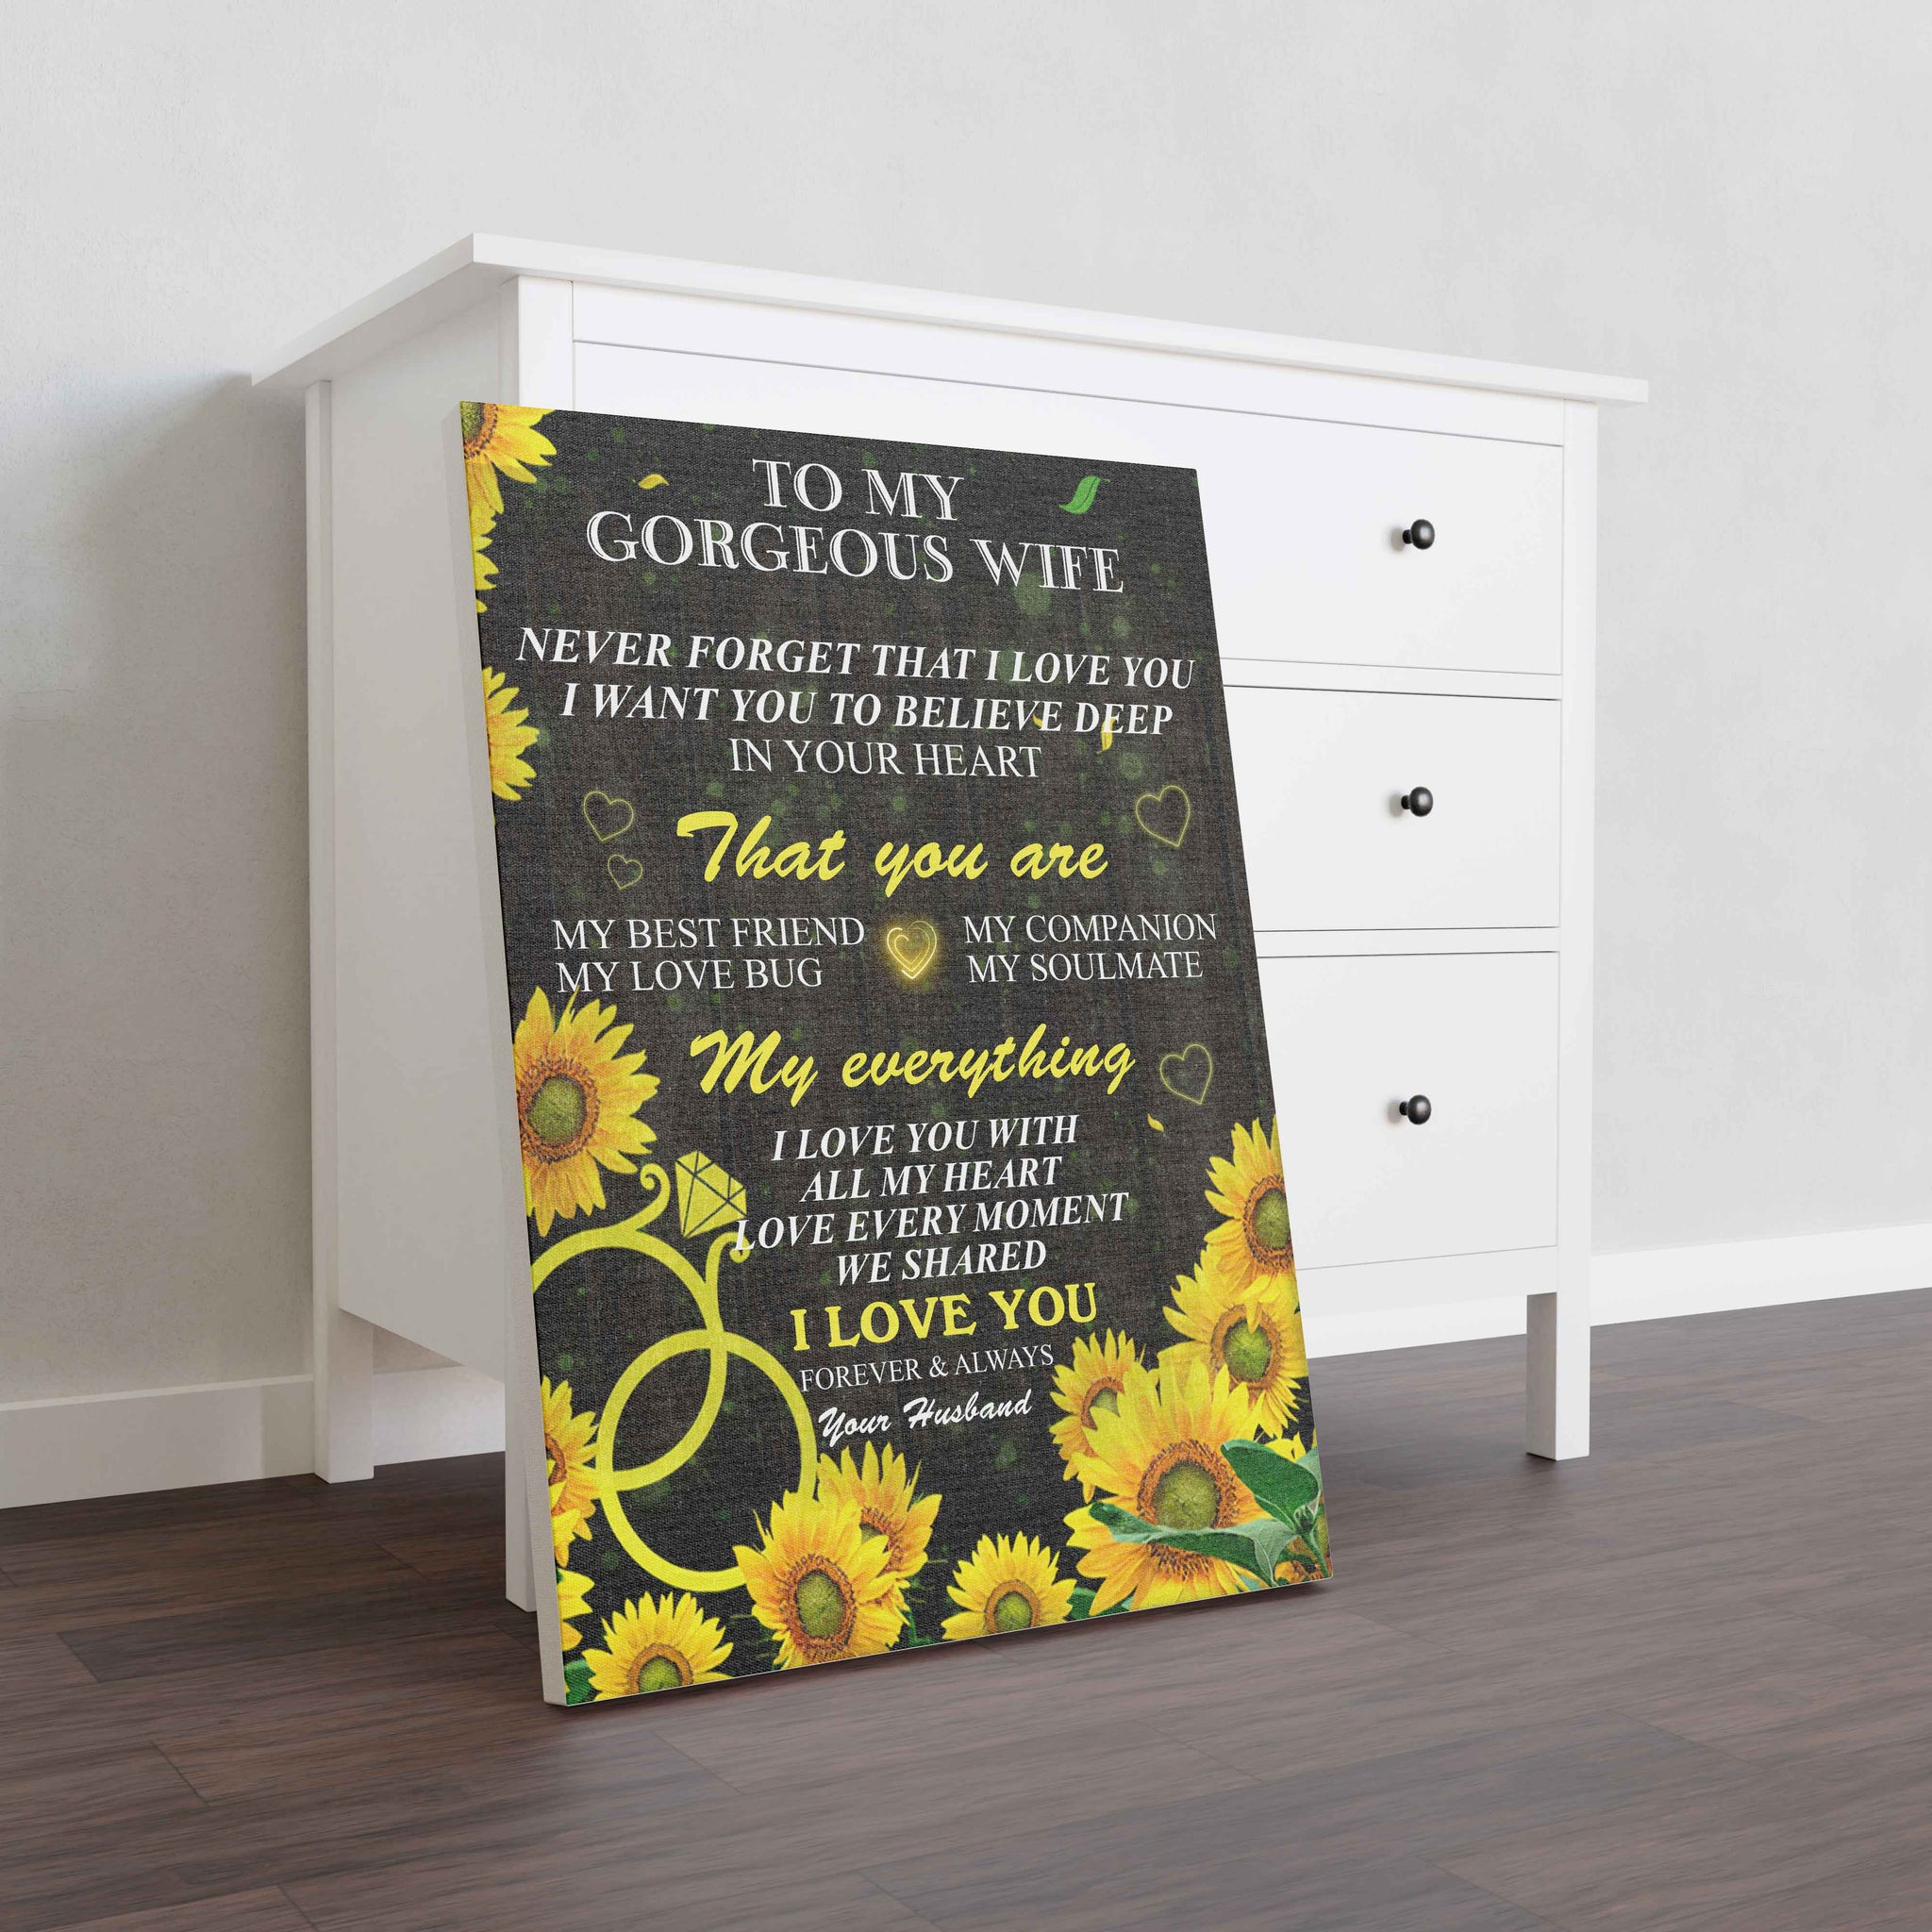 Skitongifts Wall Decoration, Home Decor, Decoration Room Husband To My Gorgeous Wife, Sunflower Never Forget That, You Are My Everything Great-TT2501